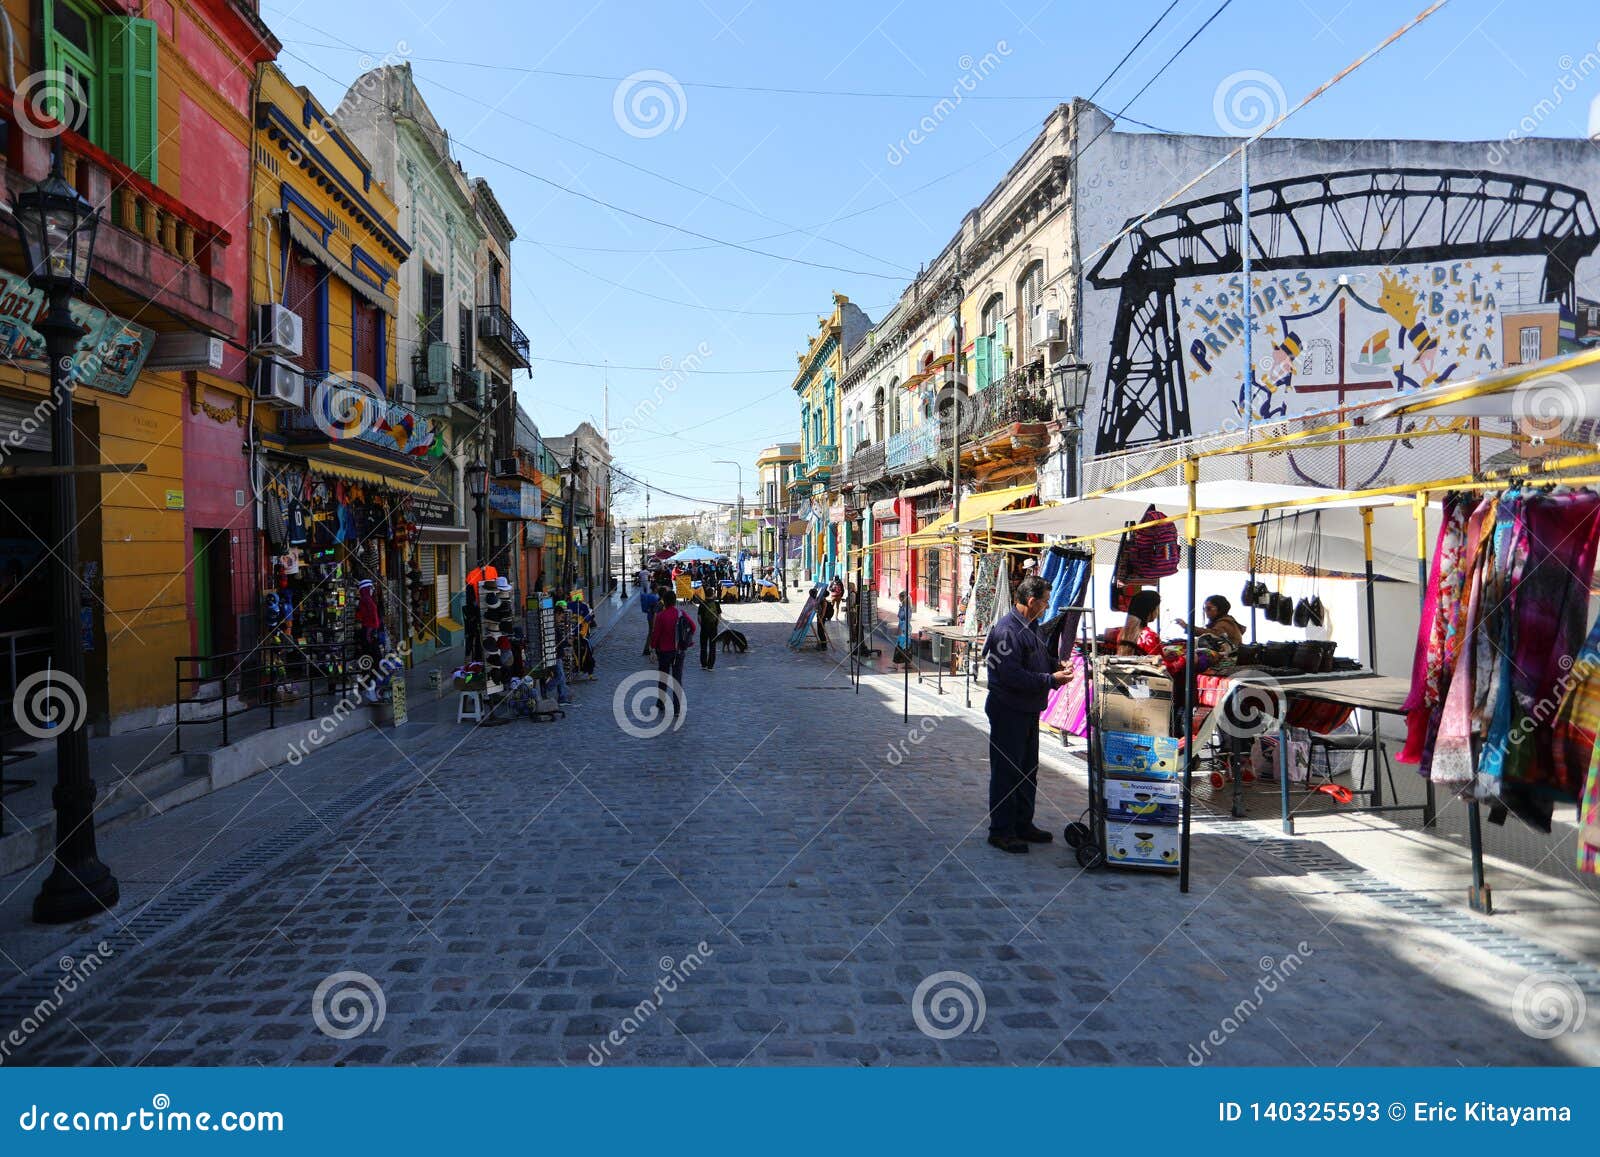 Caminito Streets with Tourists in Argentina Editorial Stock Photo